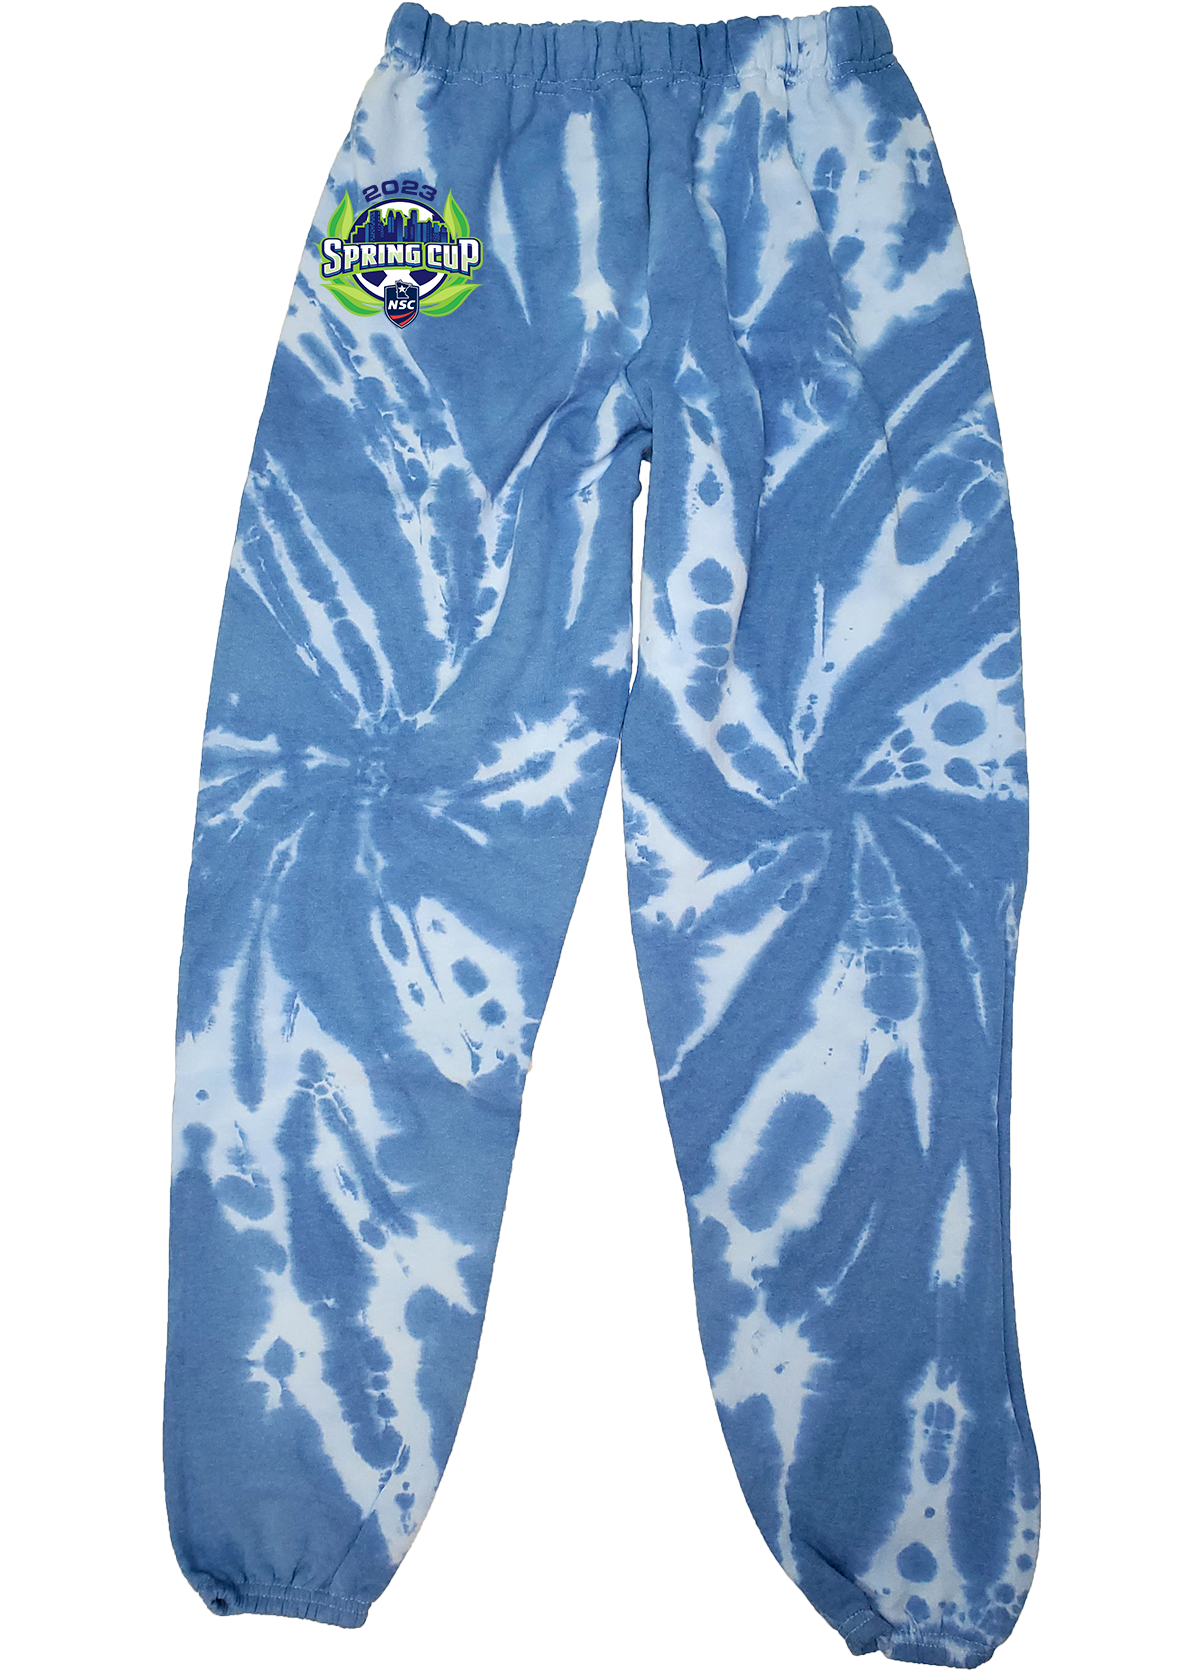 SWEAT PANTS - 2023 NSC Spring Cup